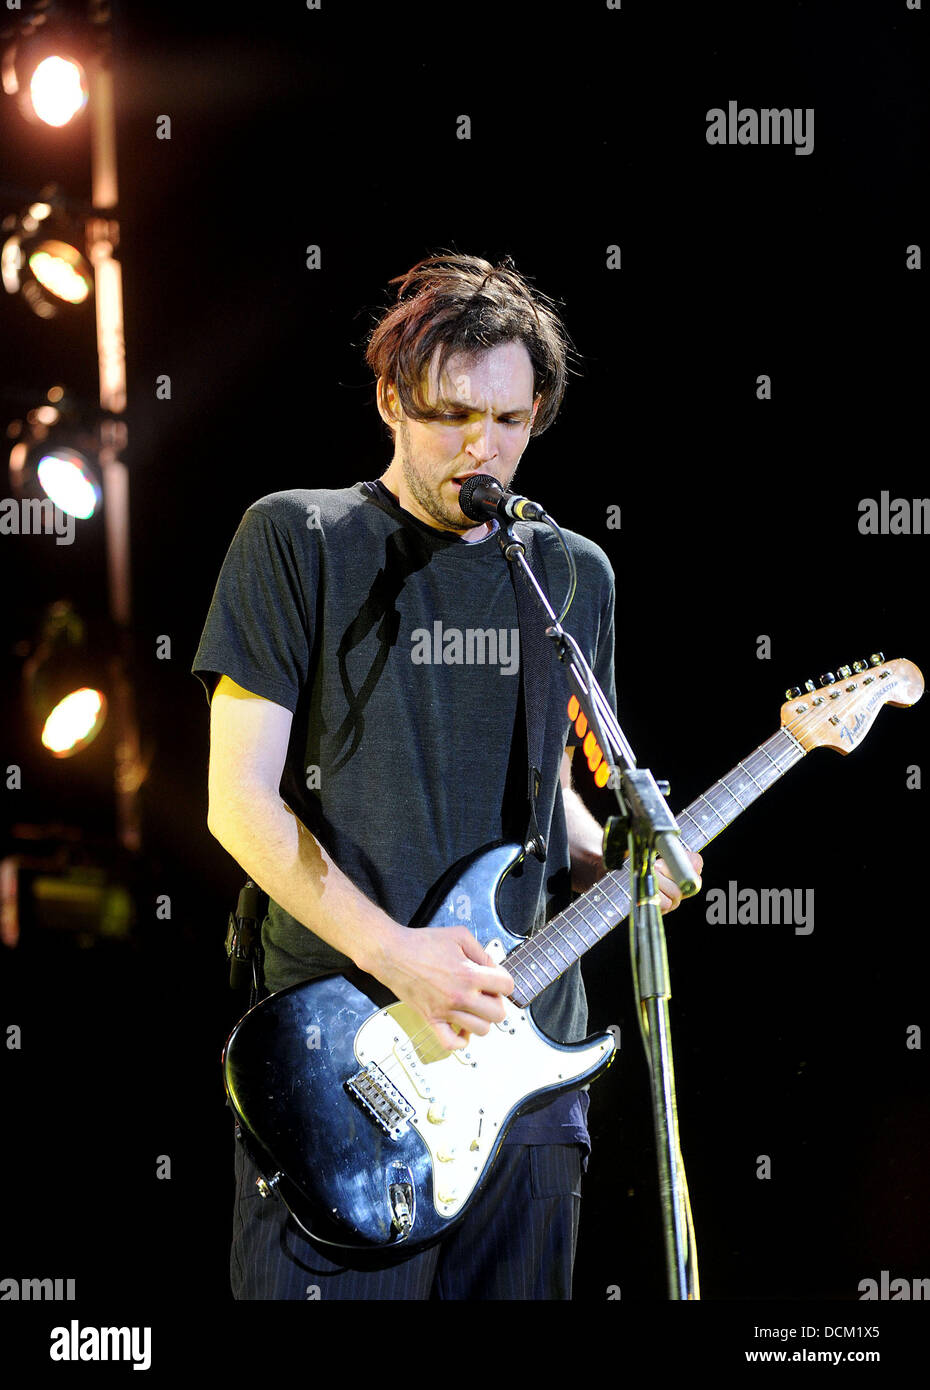 Josh Klinghoffer, of American rockband Red Hot Chili Peppers performing at  the Ahoy Stadium. Rotterdam, The Netherlands - 16.10.11 Stock Photo - Alamy